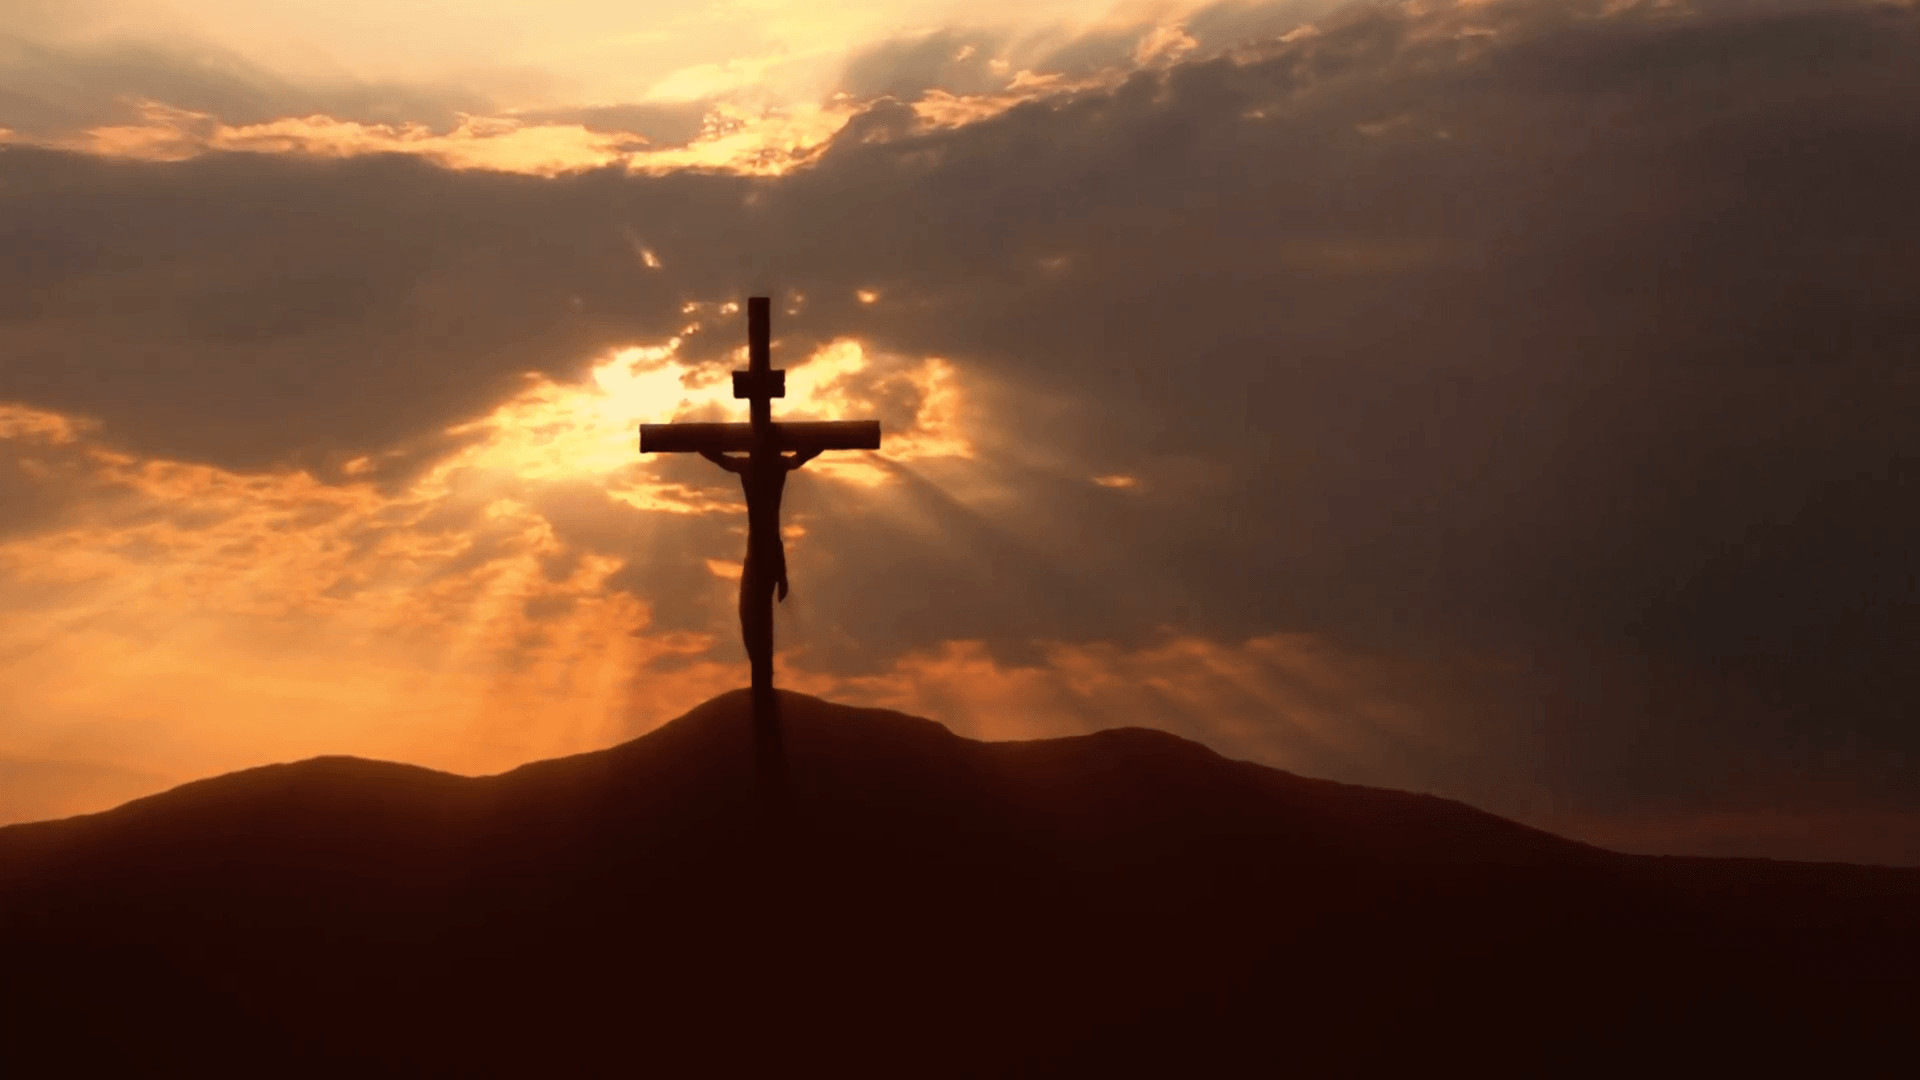 Holy Cross Hd Wallpapers And Images 2 Top Wallpaper Hd Download 1920x1080